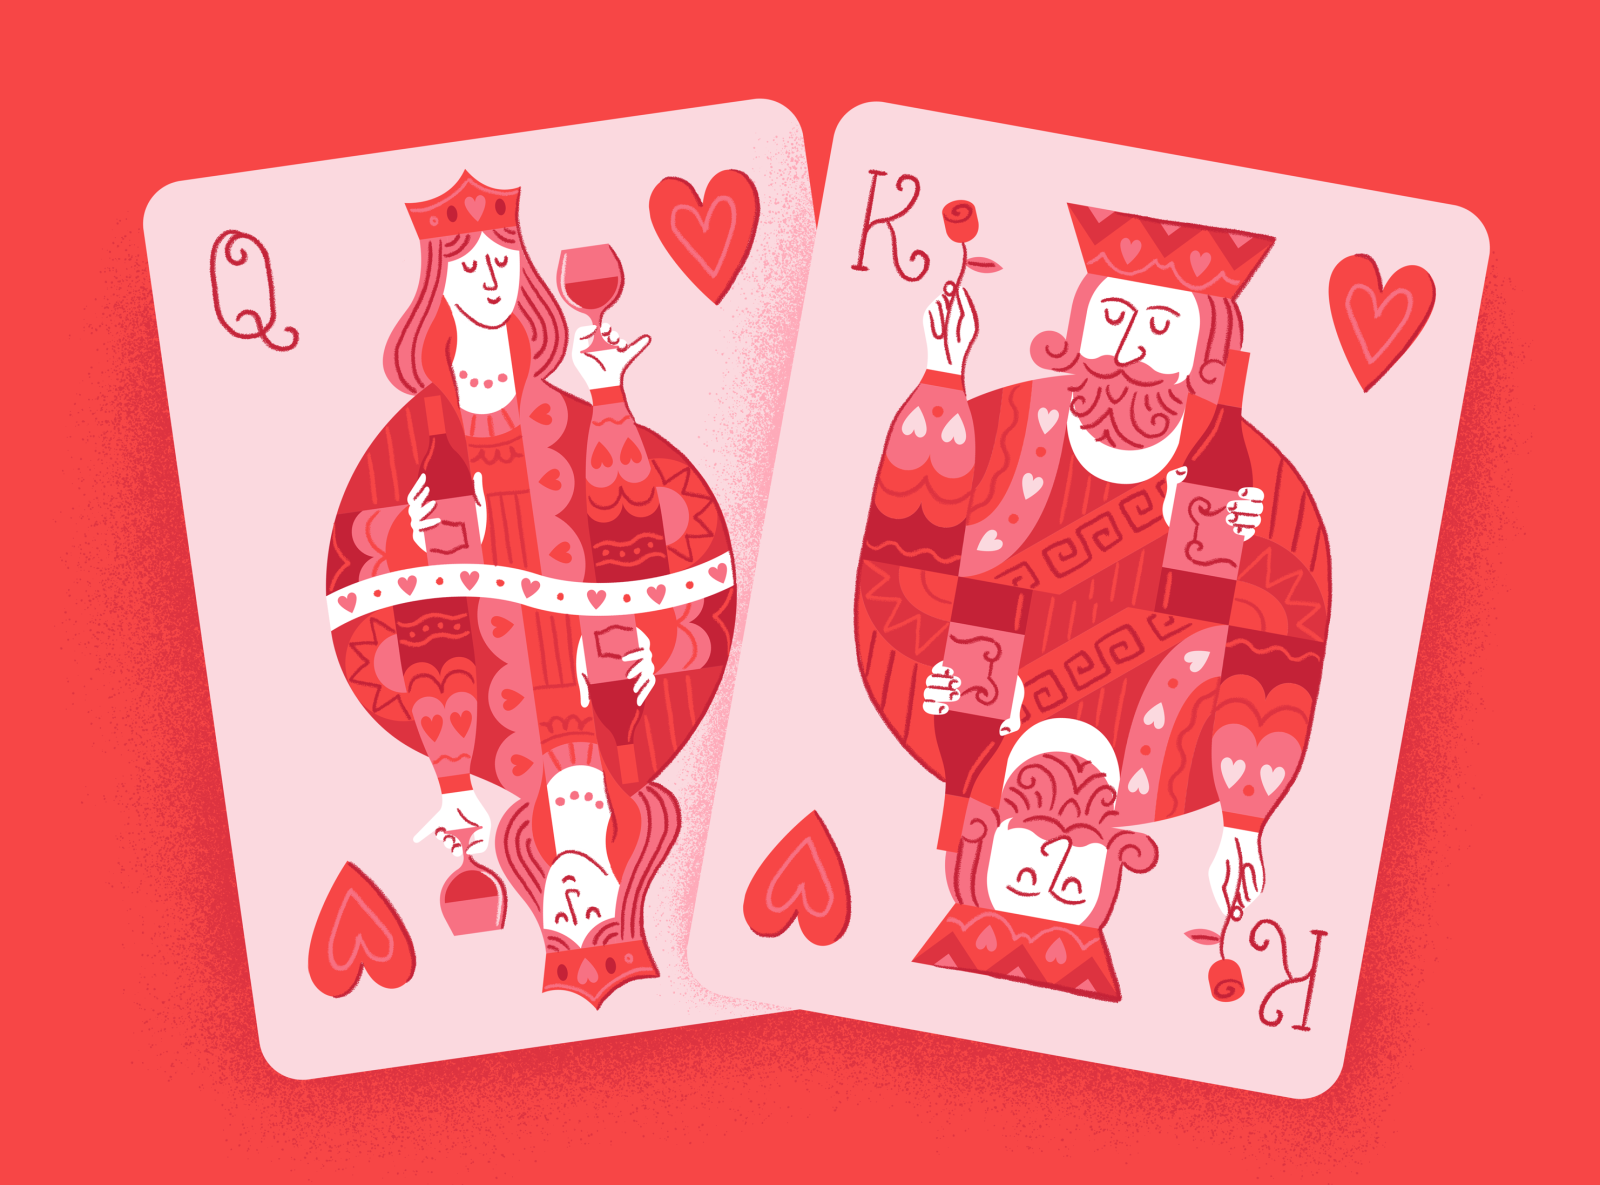 v-day-cards-illustration-by-makers-company-on-dribbble